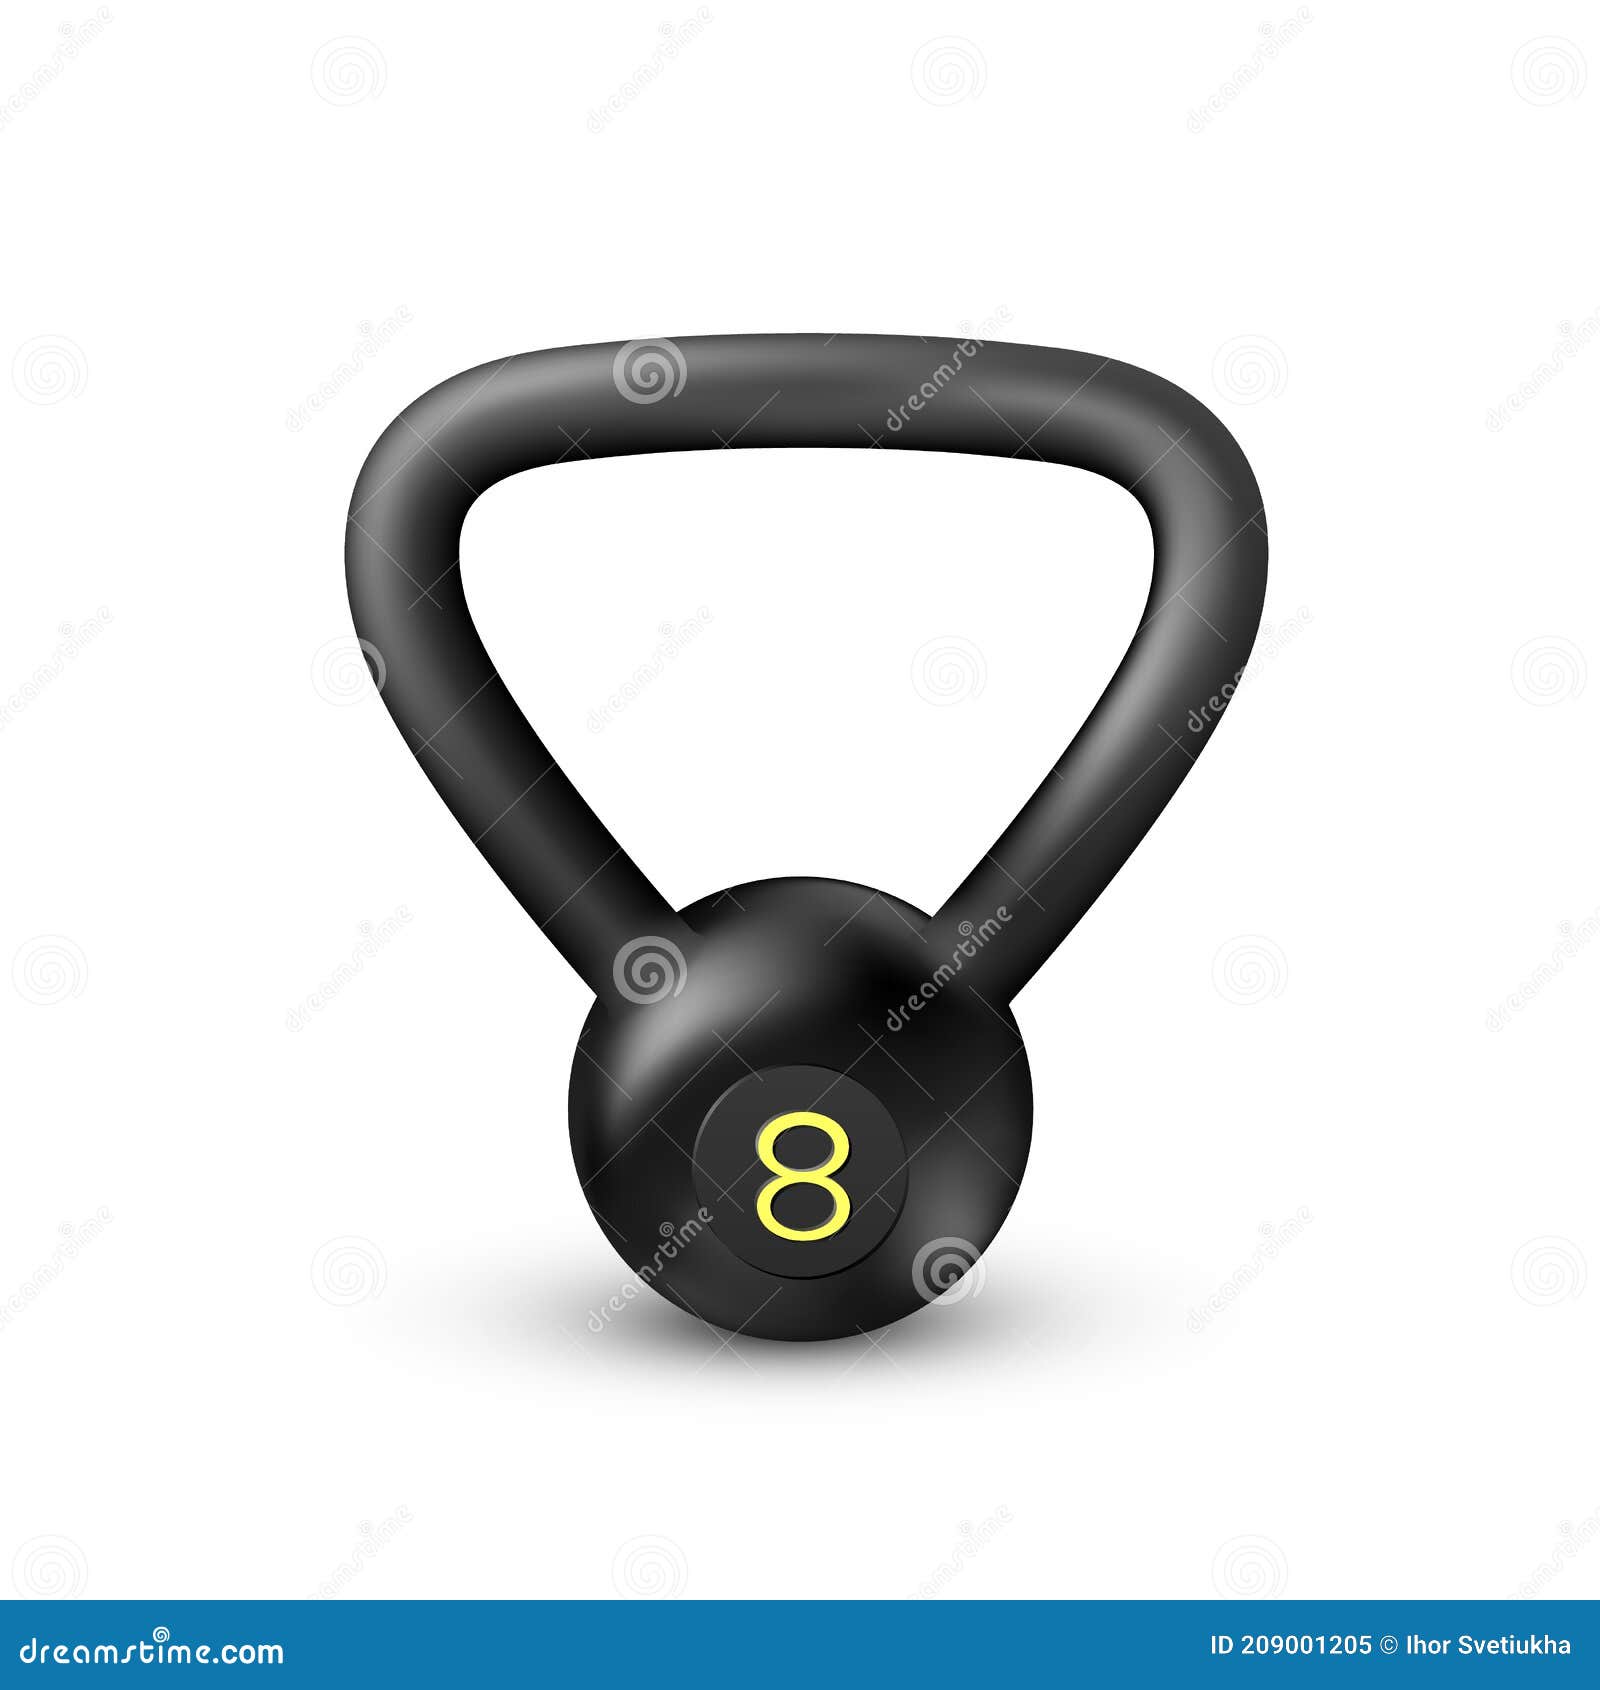 black realistic weight. kettlebell of 8 kilograms. equipment for bodybuilding and workout. 